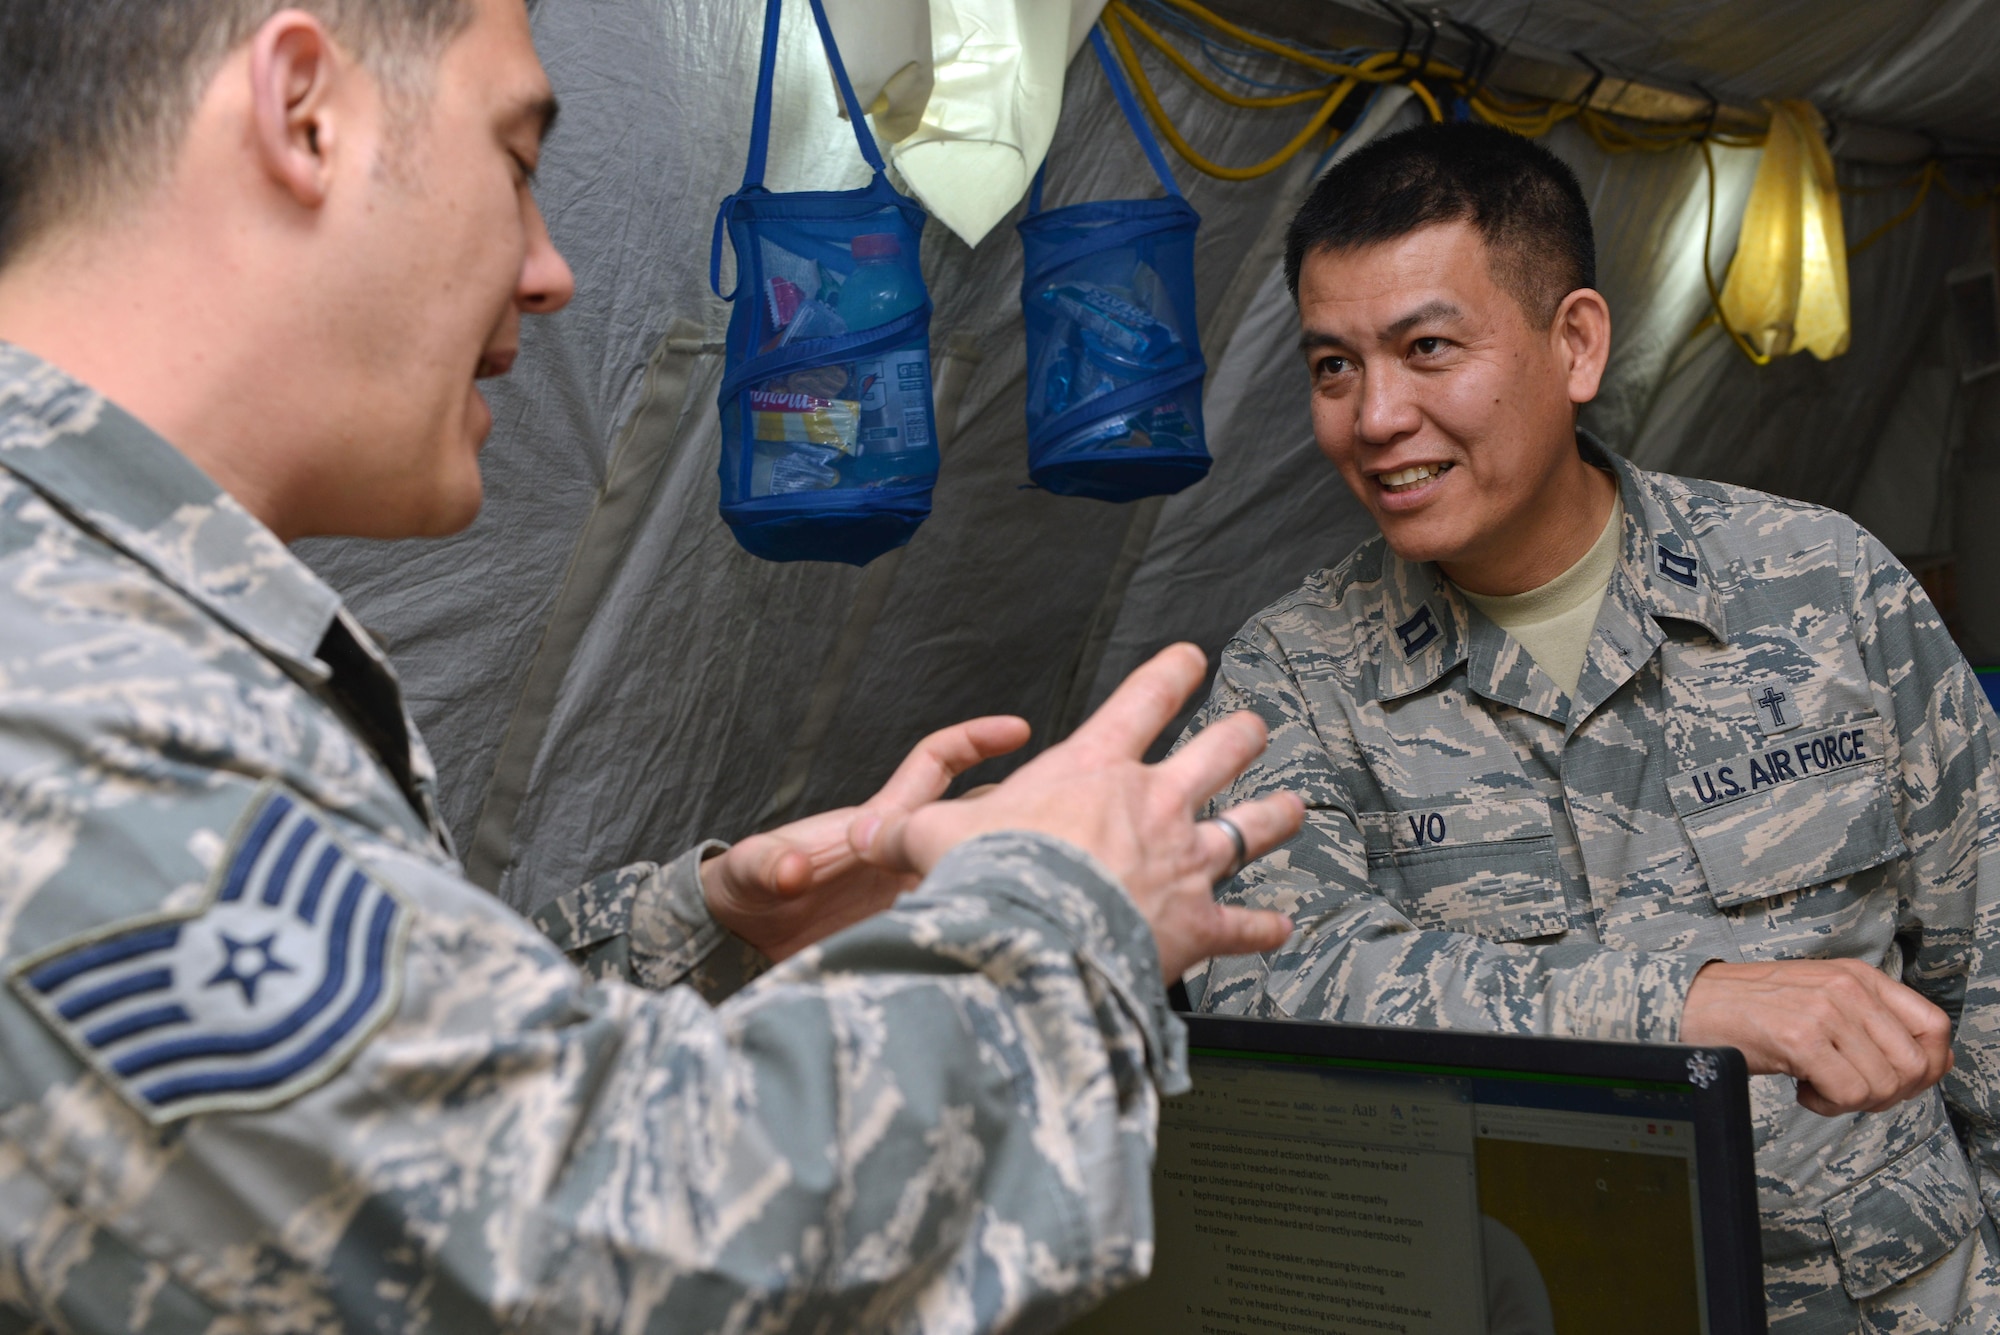 U.S. Air Force Chaplain (Capt.) Peter Vo (right), 31st Fighter Wing chaplain, speaks with an Airman, April 27, 2017, at Diyarbakir Air Base, Turkey. Chaplains visit units to learn about how they contribute to the mission and check on spiritual fitness. (U.S. Air Force photo by Senior Airman John Nieves Camacho)